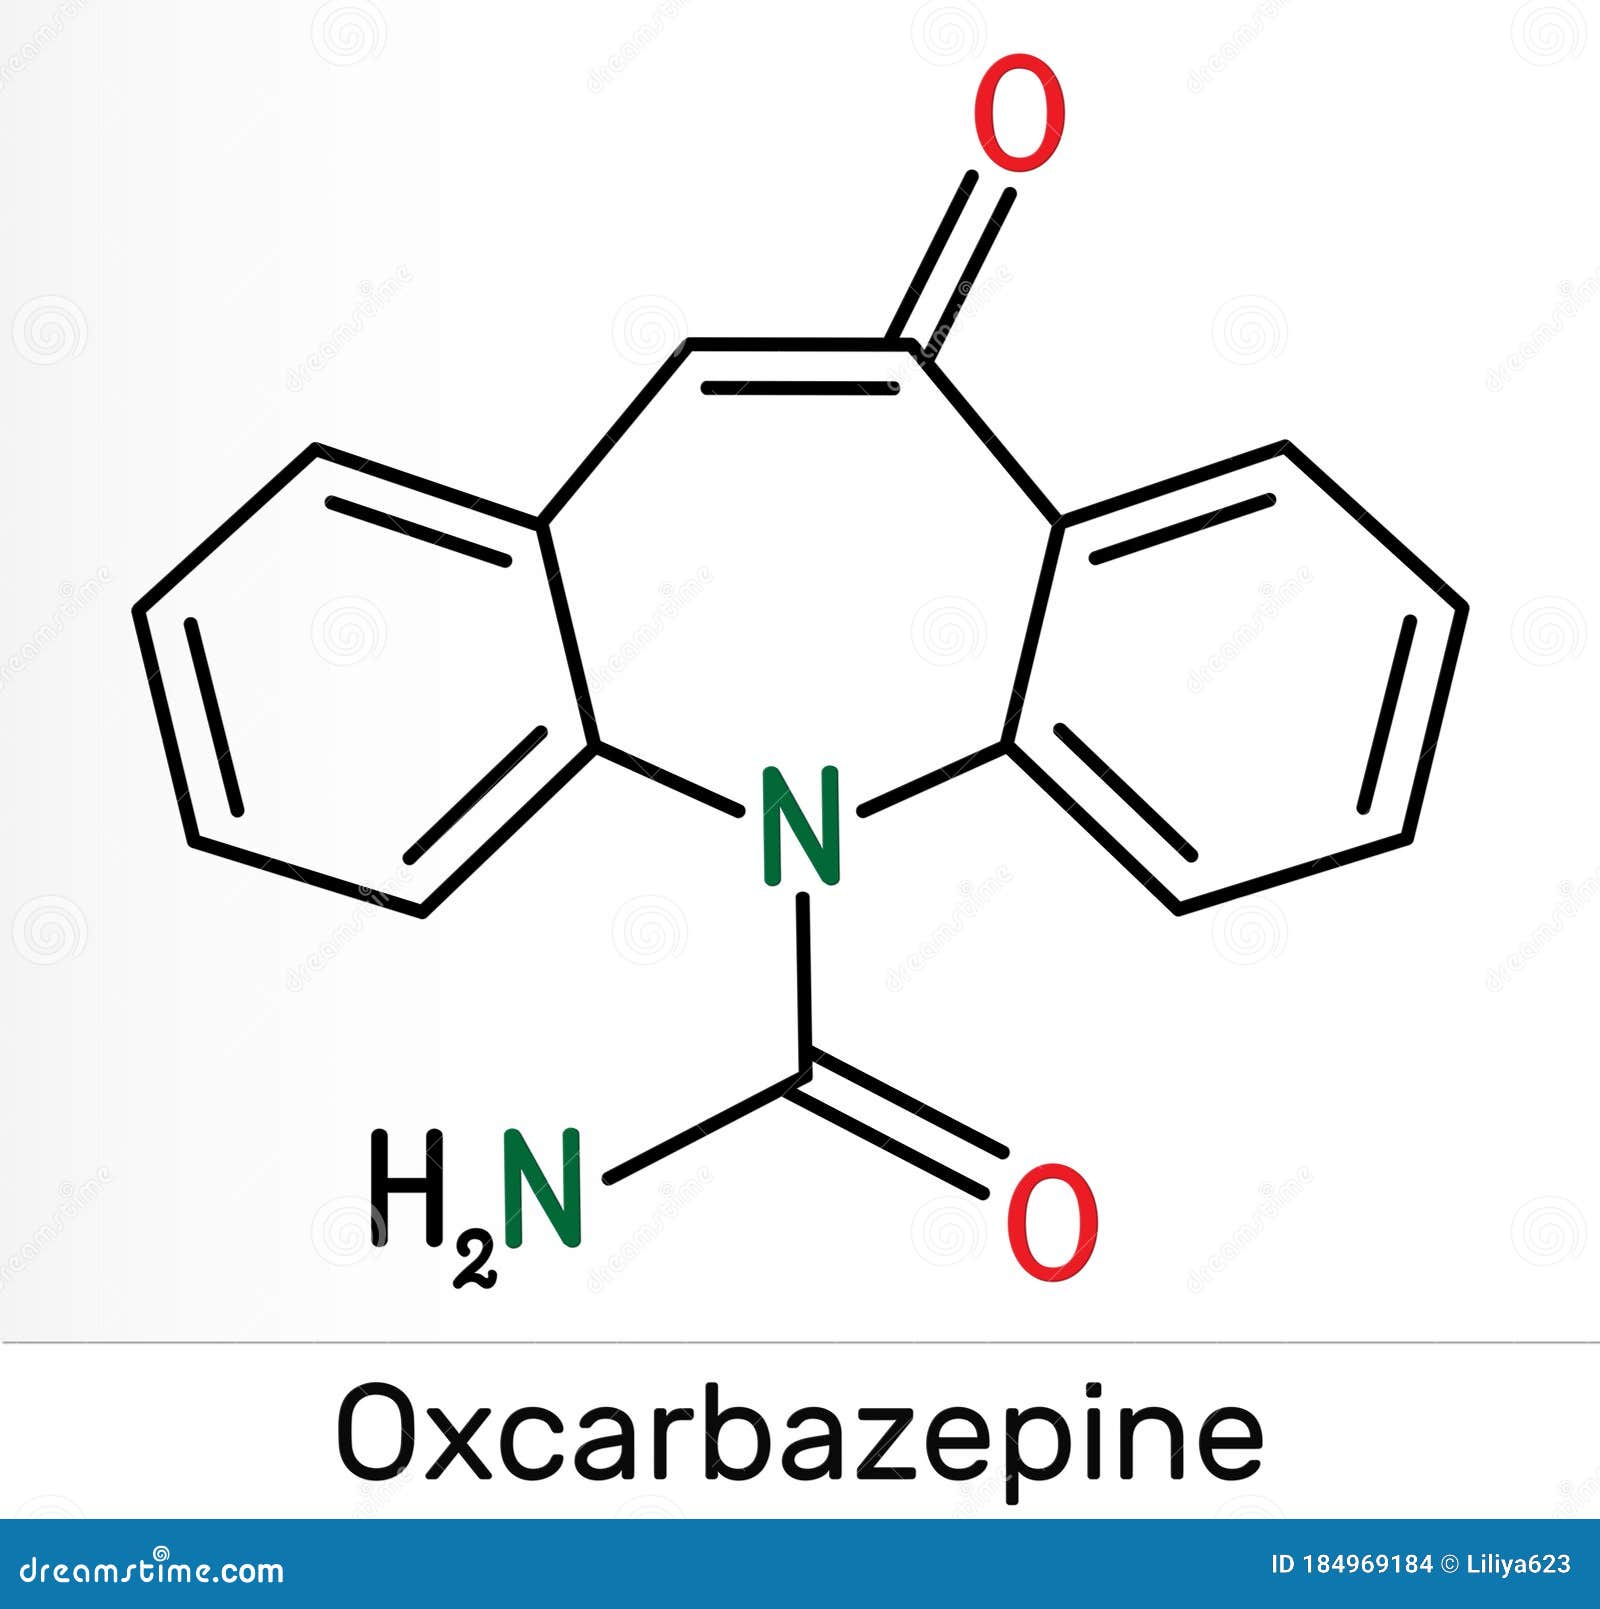 oxcarbazepine, c15h12n2o2 molecule. it is antiepileptic, anticonvulsant drug used in treatment of seizures, epilepsy, bipolar